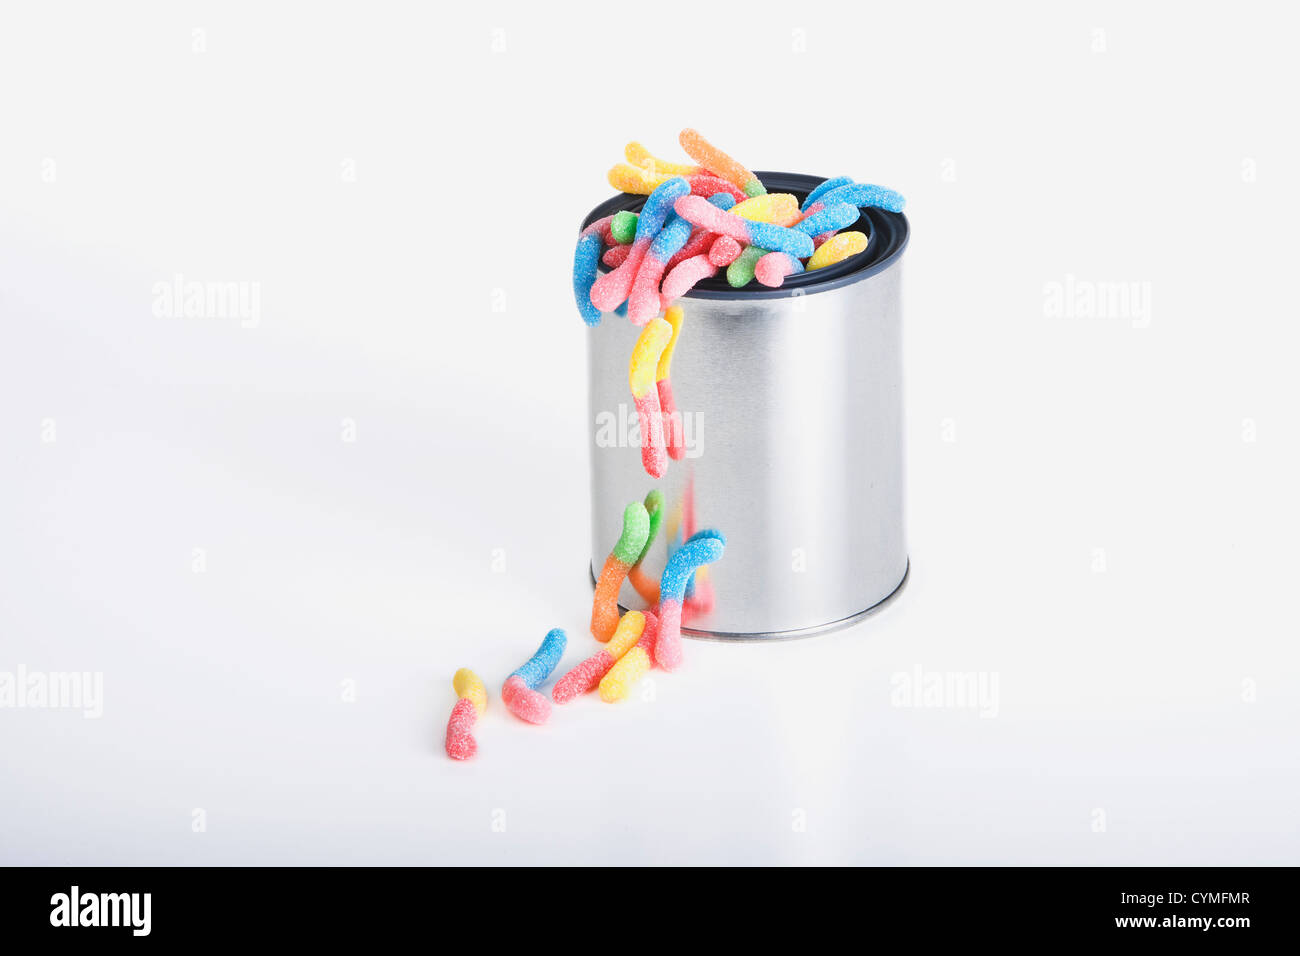 Shiny can of candy worms isolated against a white background Stock Photo